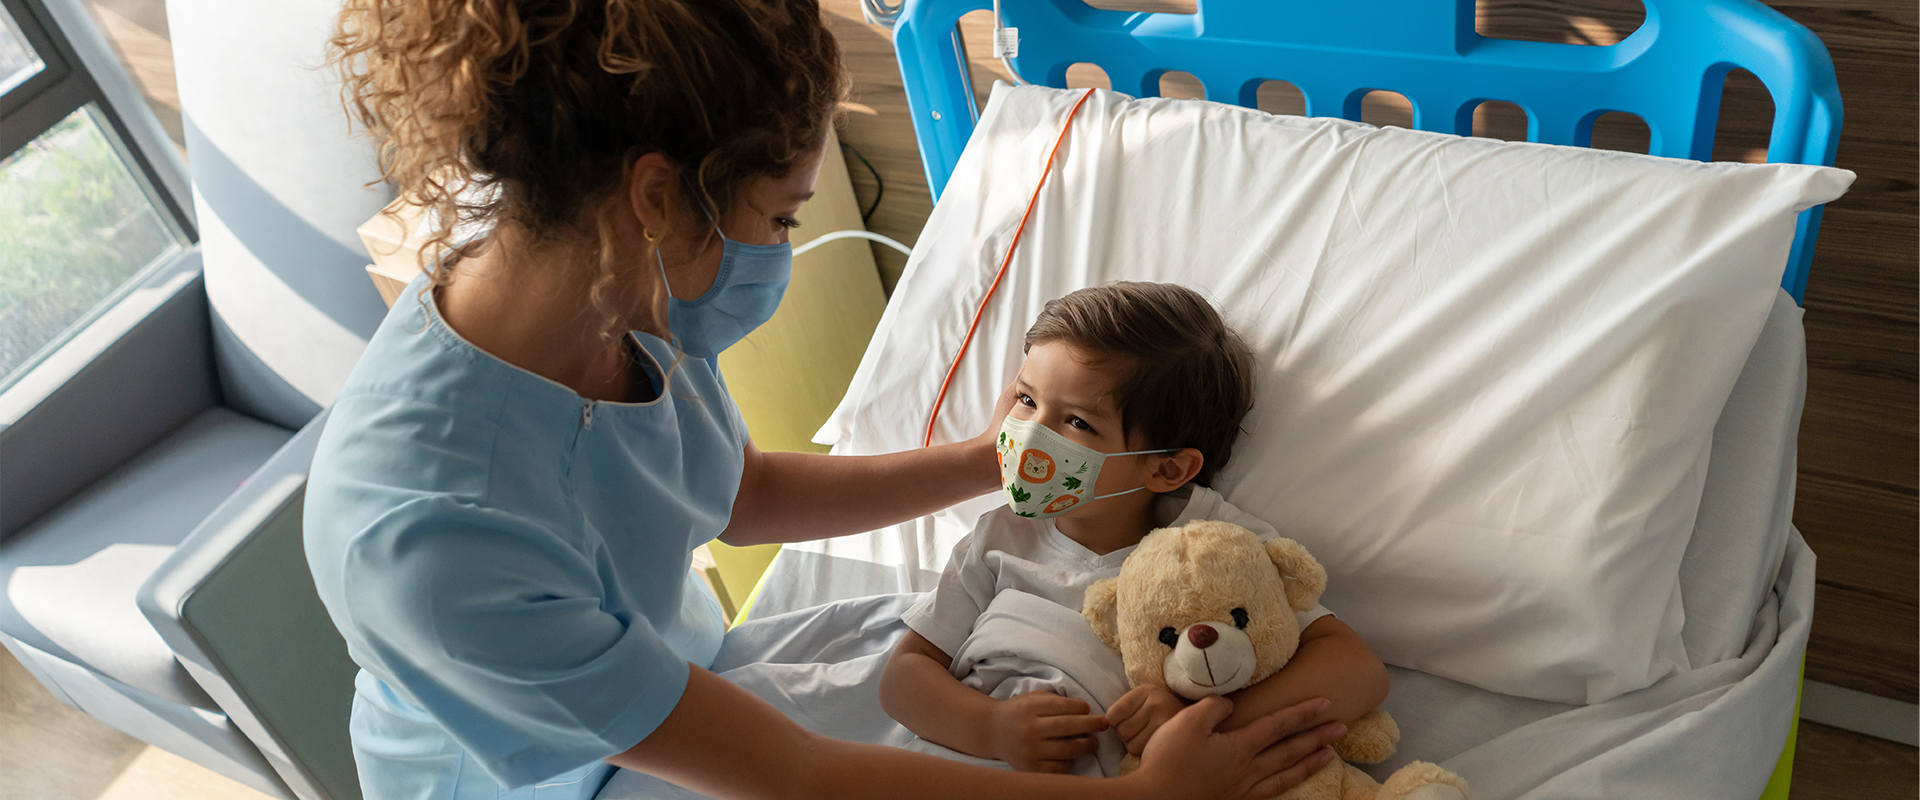 Female provider with boy holding teddy bear in hospital bed